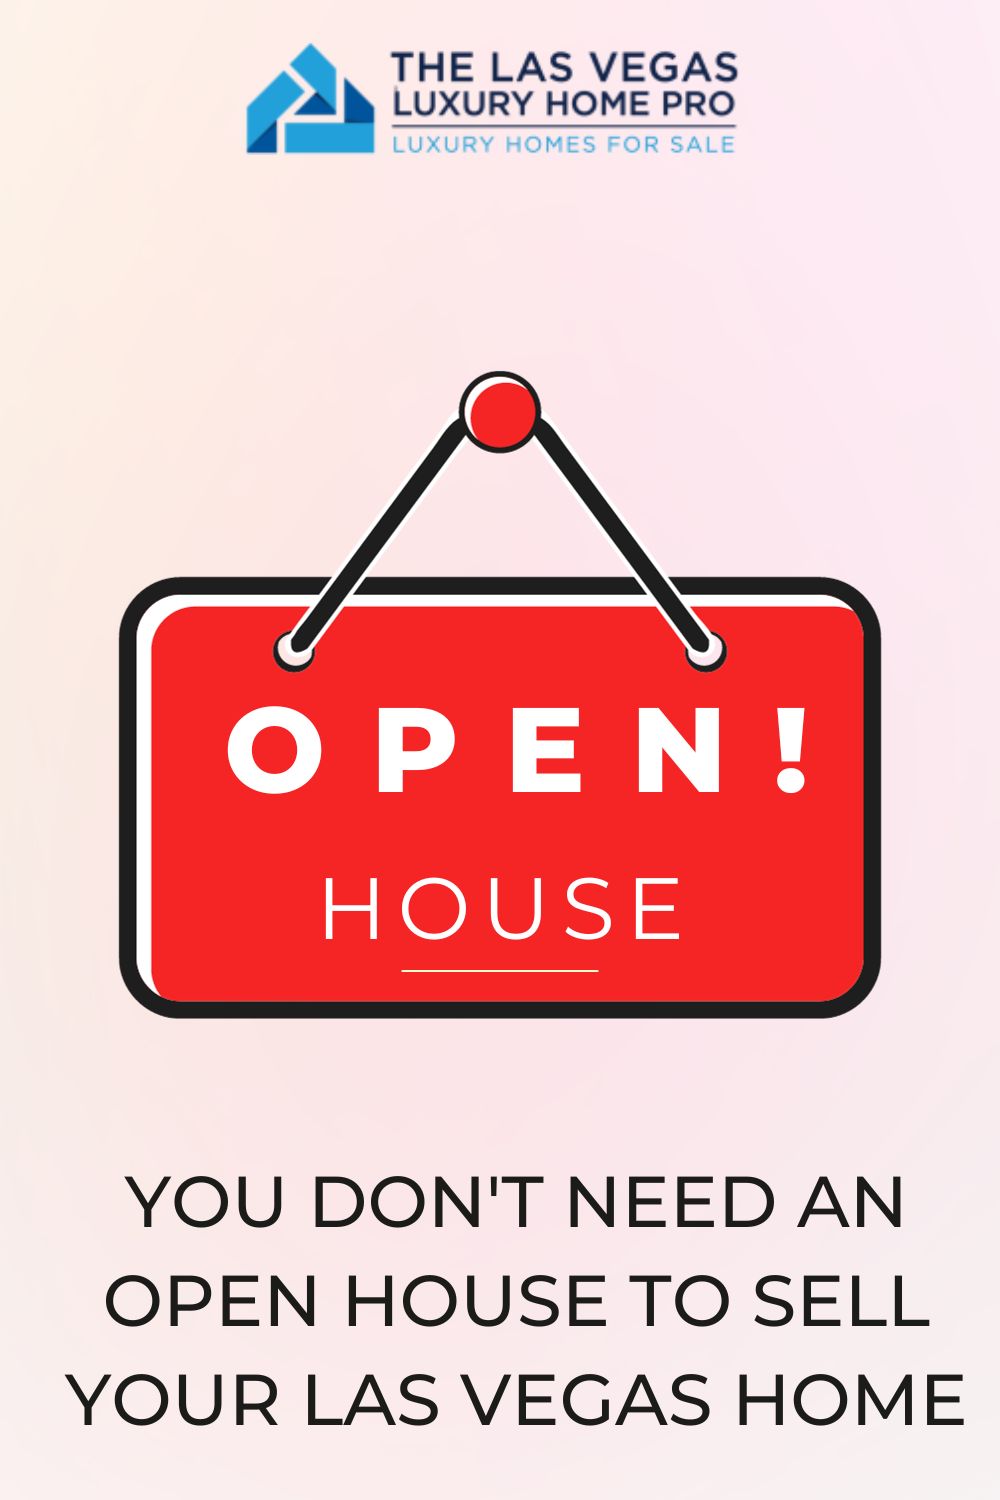 You Don't Need an Open House to Sell Your Las Vegas Home